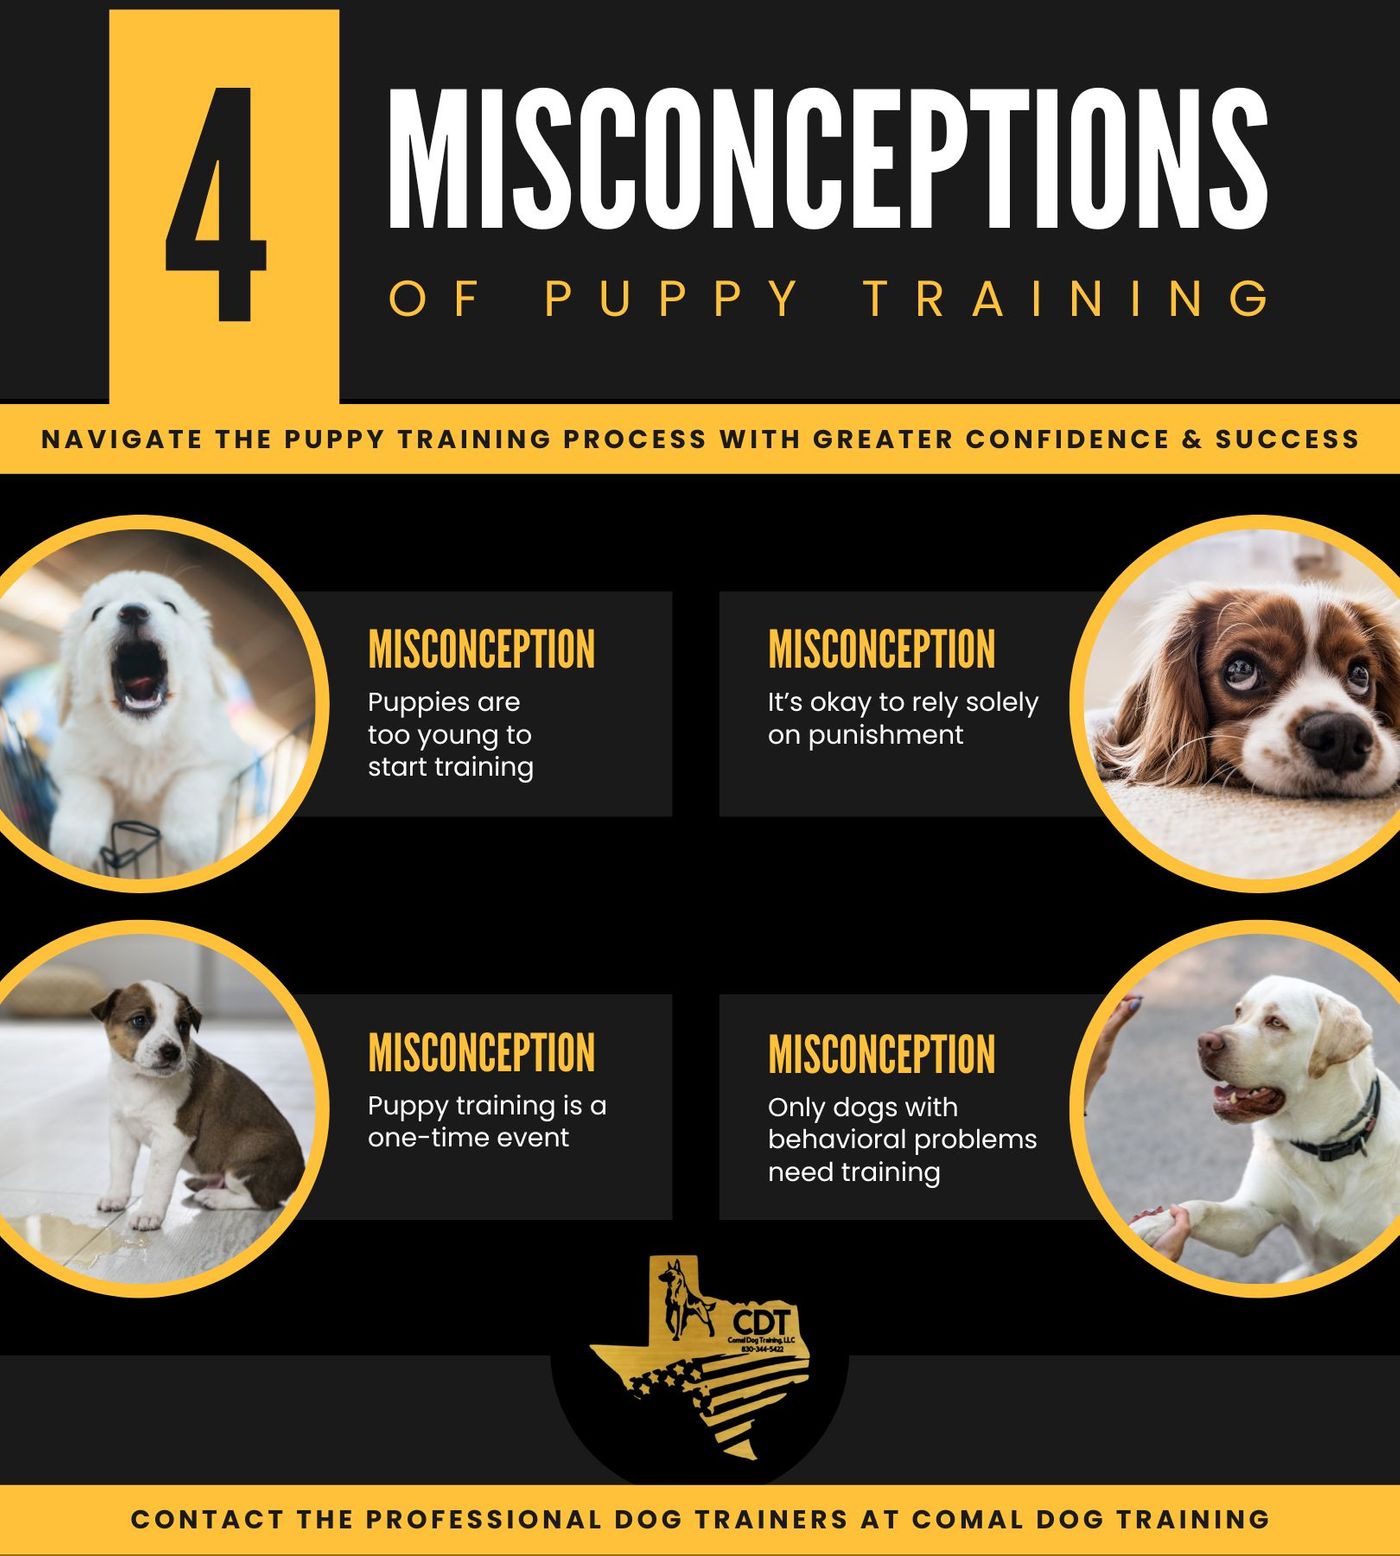 M38599 - IG - 4 Misconceptions Of Puppy Training (1).jpg